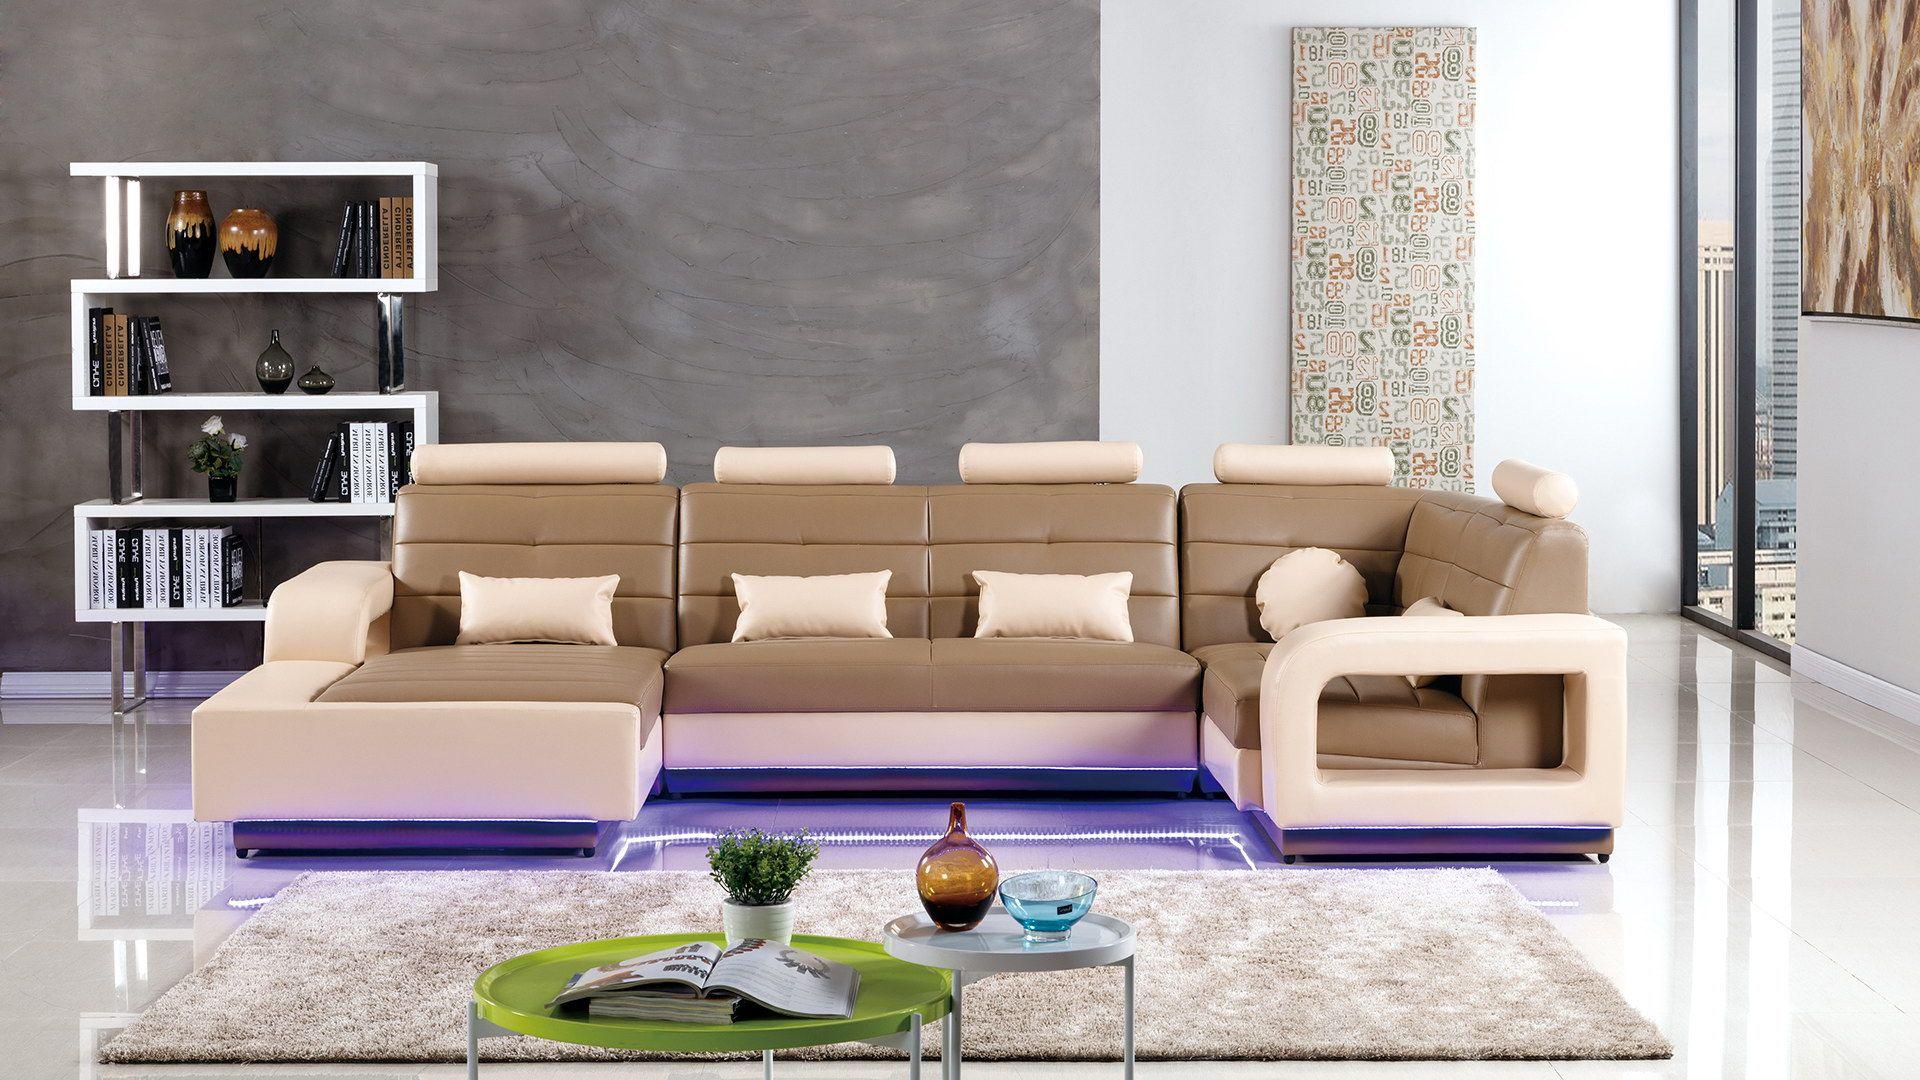 Contemporary, Modern Sectional Sofa AE-LD800-CA.CRM AE-LD800L-CA.CRM in Camel, Cream Bonded Leather